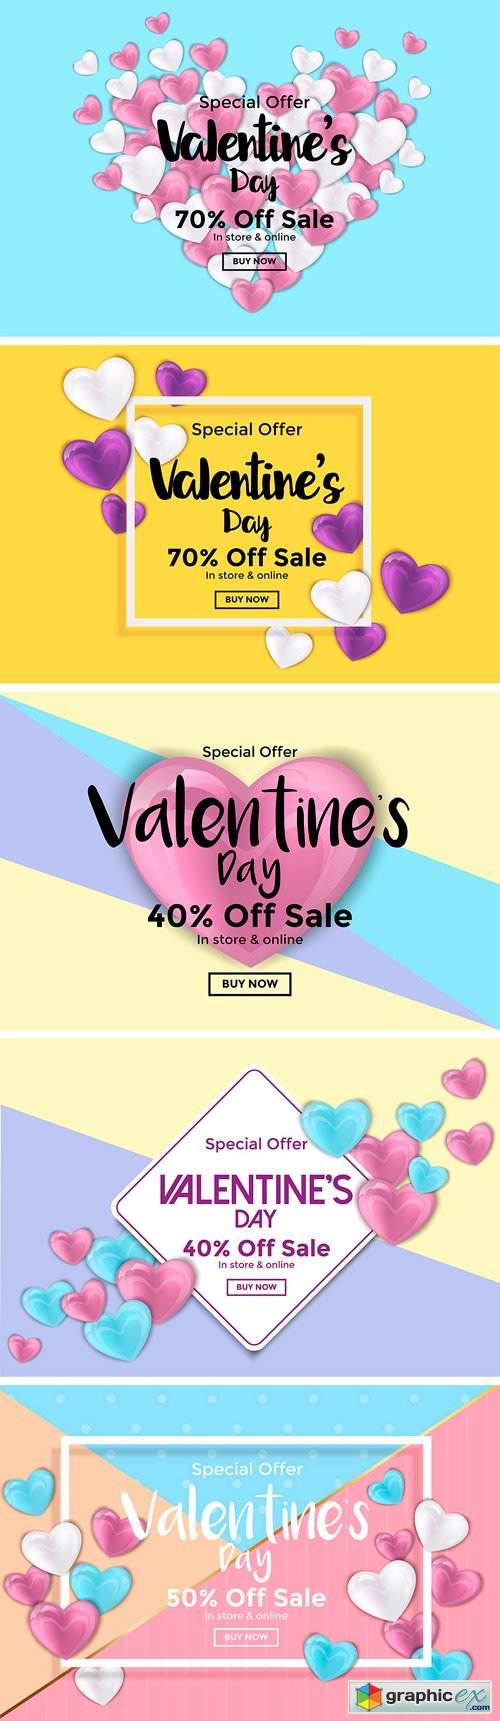 Trendy Valentines Day Greeting Cards